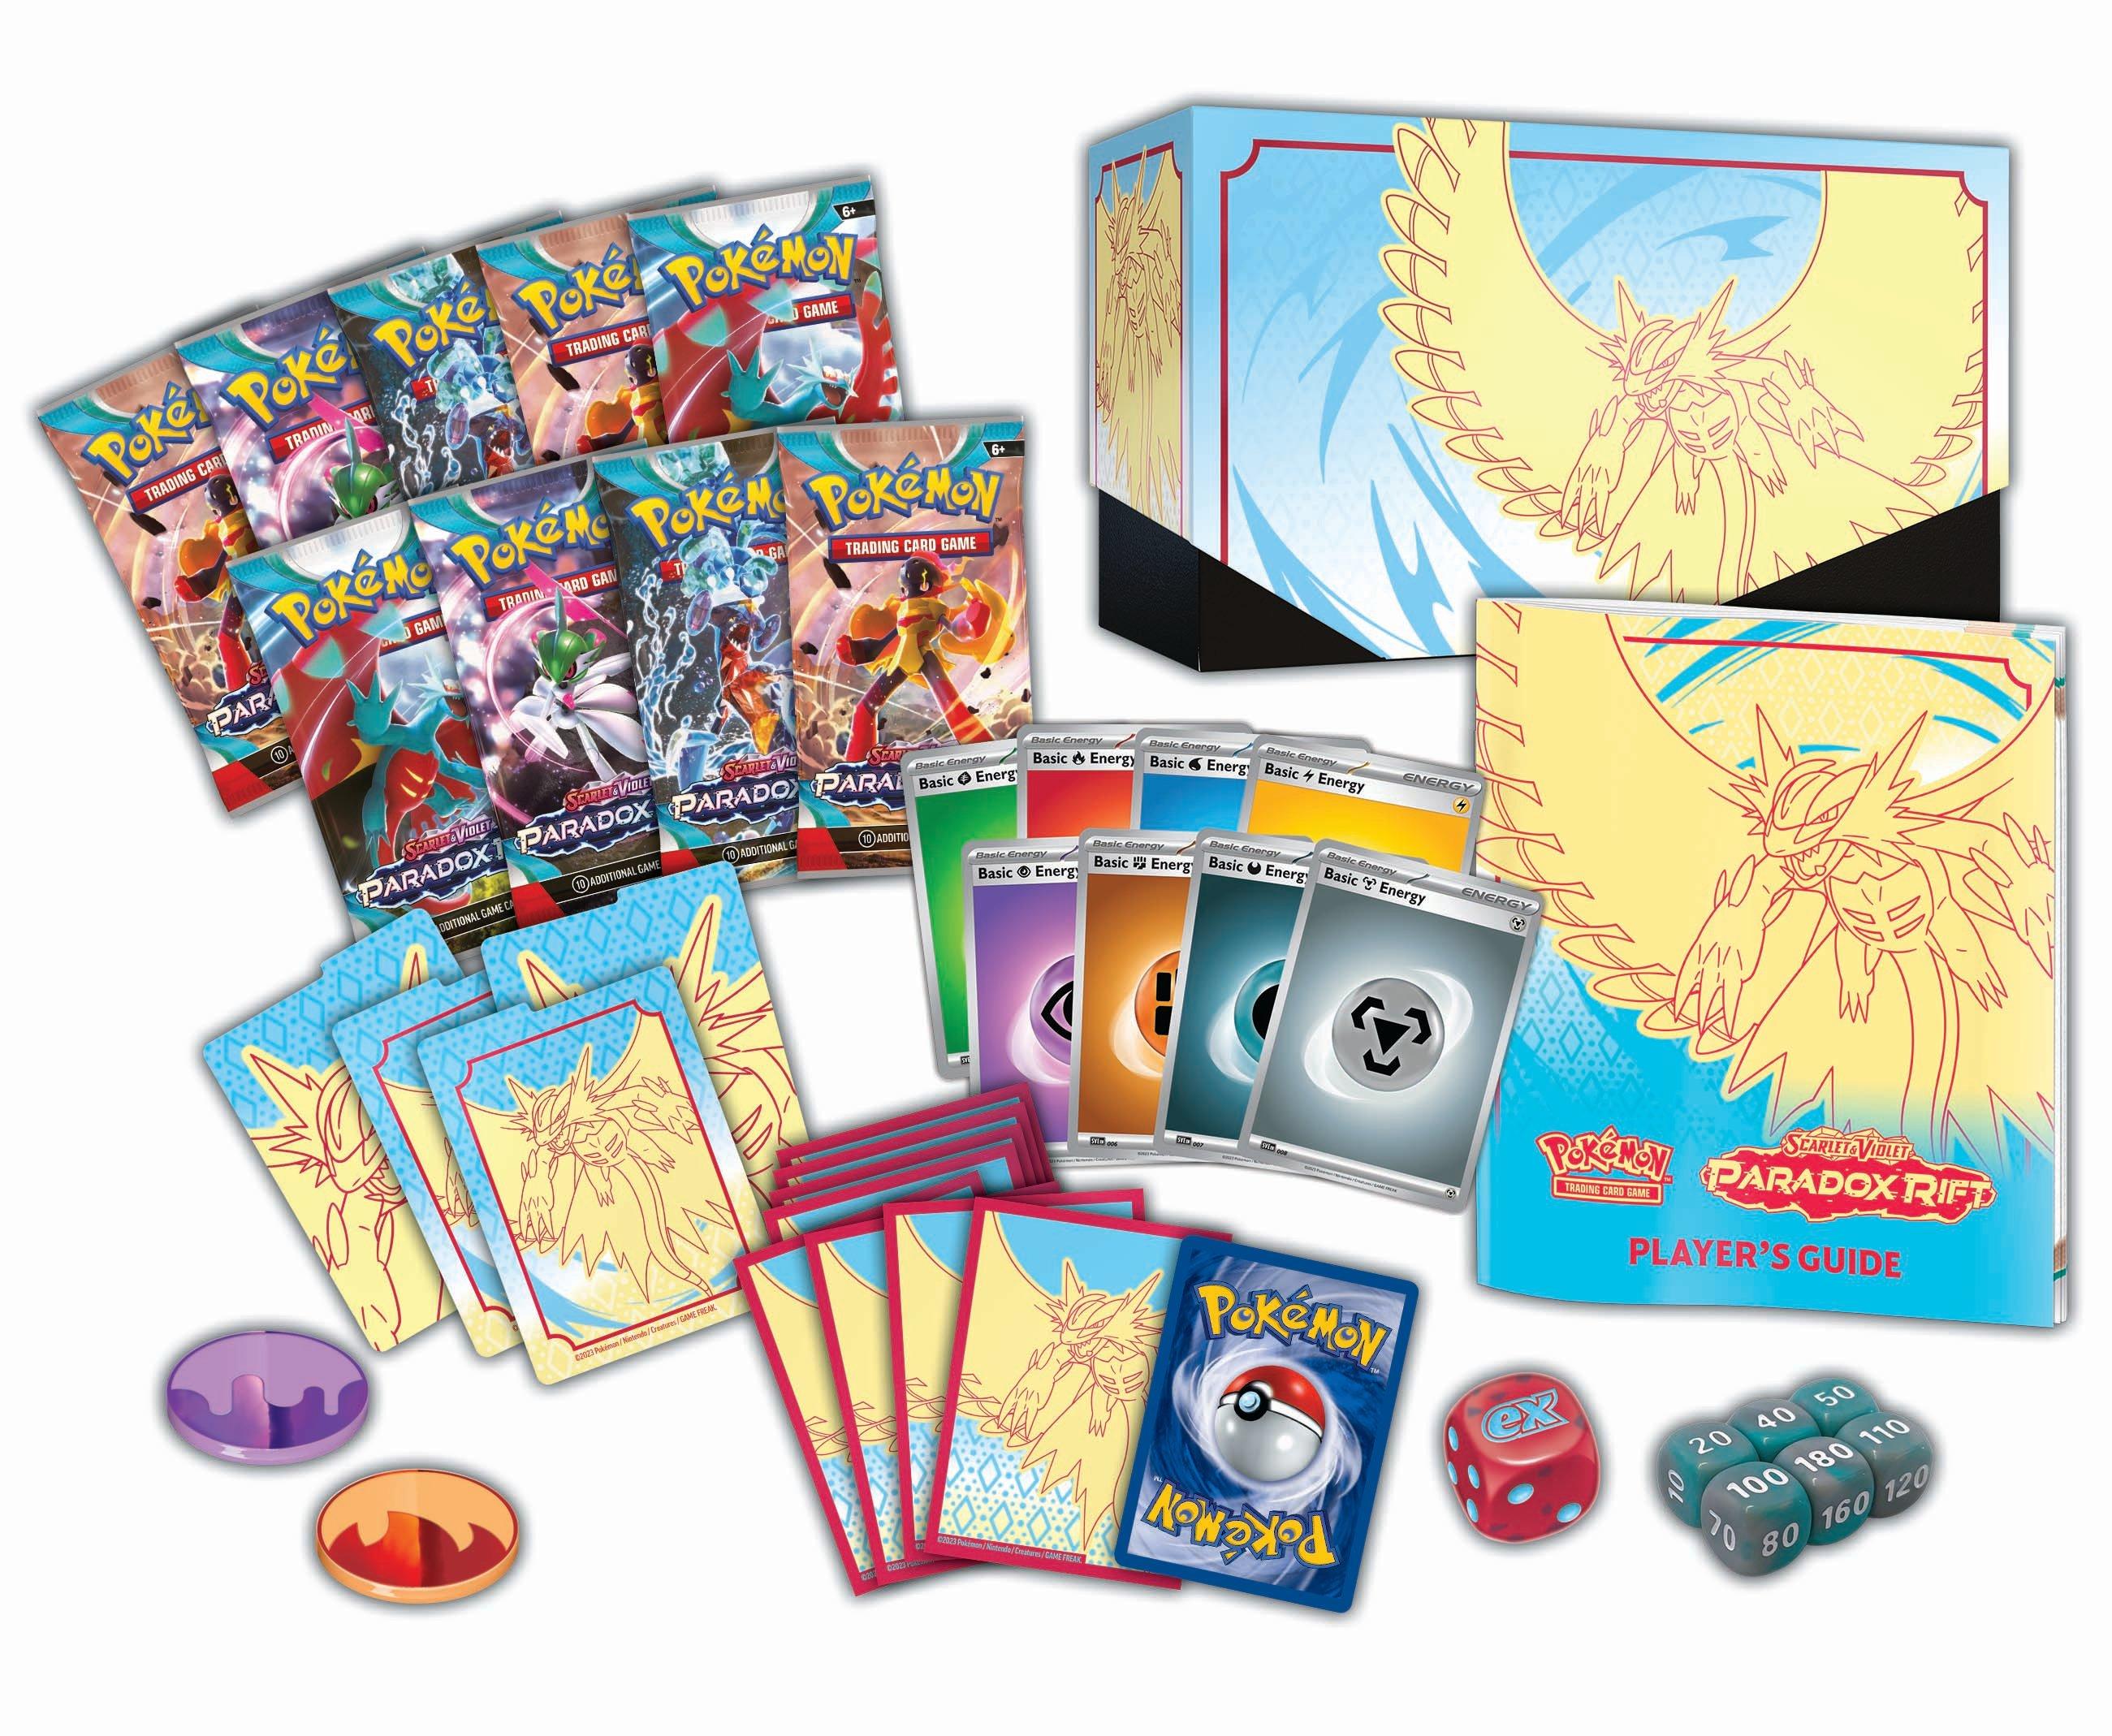 Pokemon Cards - POKEMON GO MEWTWO ELITE TRAINER BOX (10 Packs, 65 Sleeves,  Energy Cards & More):  - Toys, Plush, Trading Cards, Action  Figures & Games online retail store shop sale